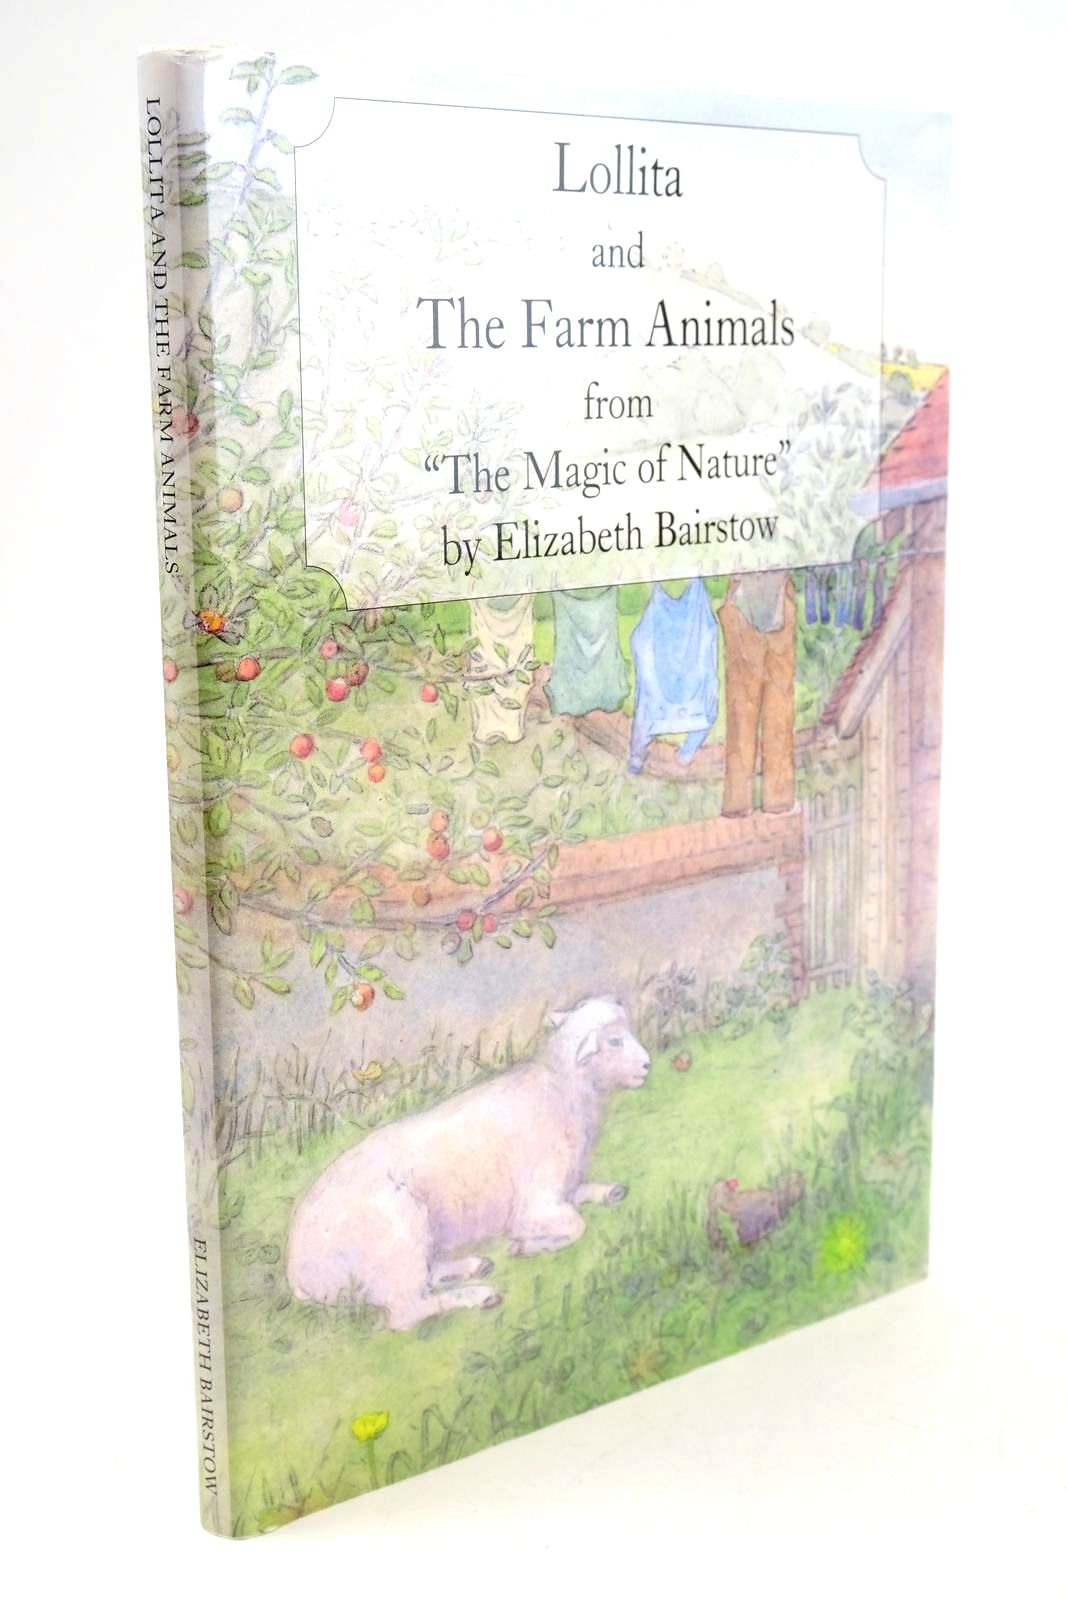 Photo of LOLLITA AND THE FARM ANIMALS FROM &quot;THE MAGIC OF NATURE&quot; ABOUT A FARM written by Bairstow, Elizabeth illustrated by Bairstow, Elizabeth published by The Bairstow Gallery (STOCK CODE: 1325056)  for sale by Stella & Rose's Books